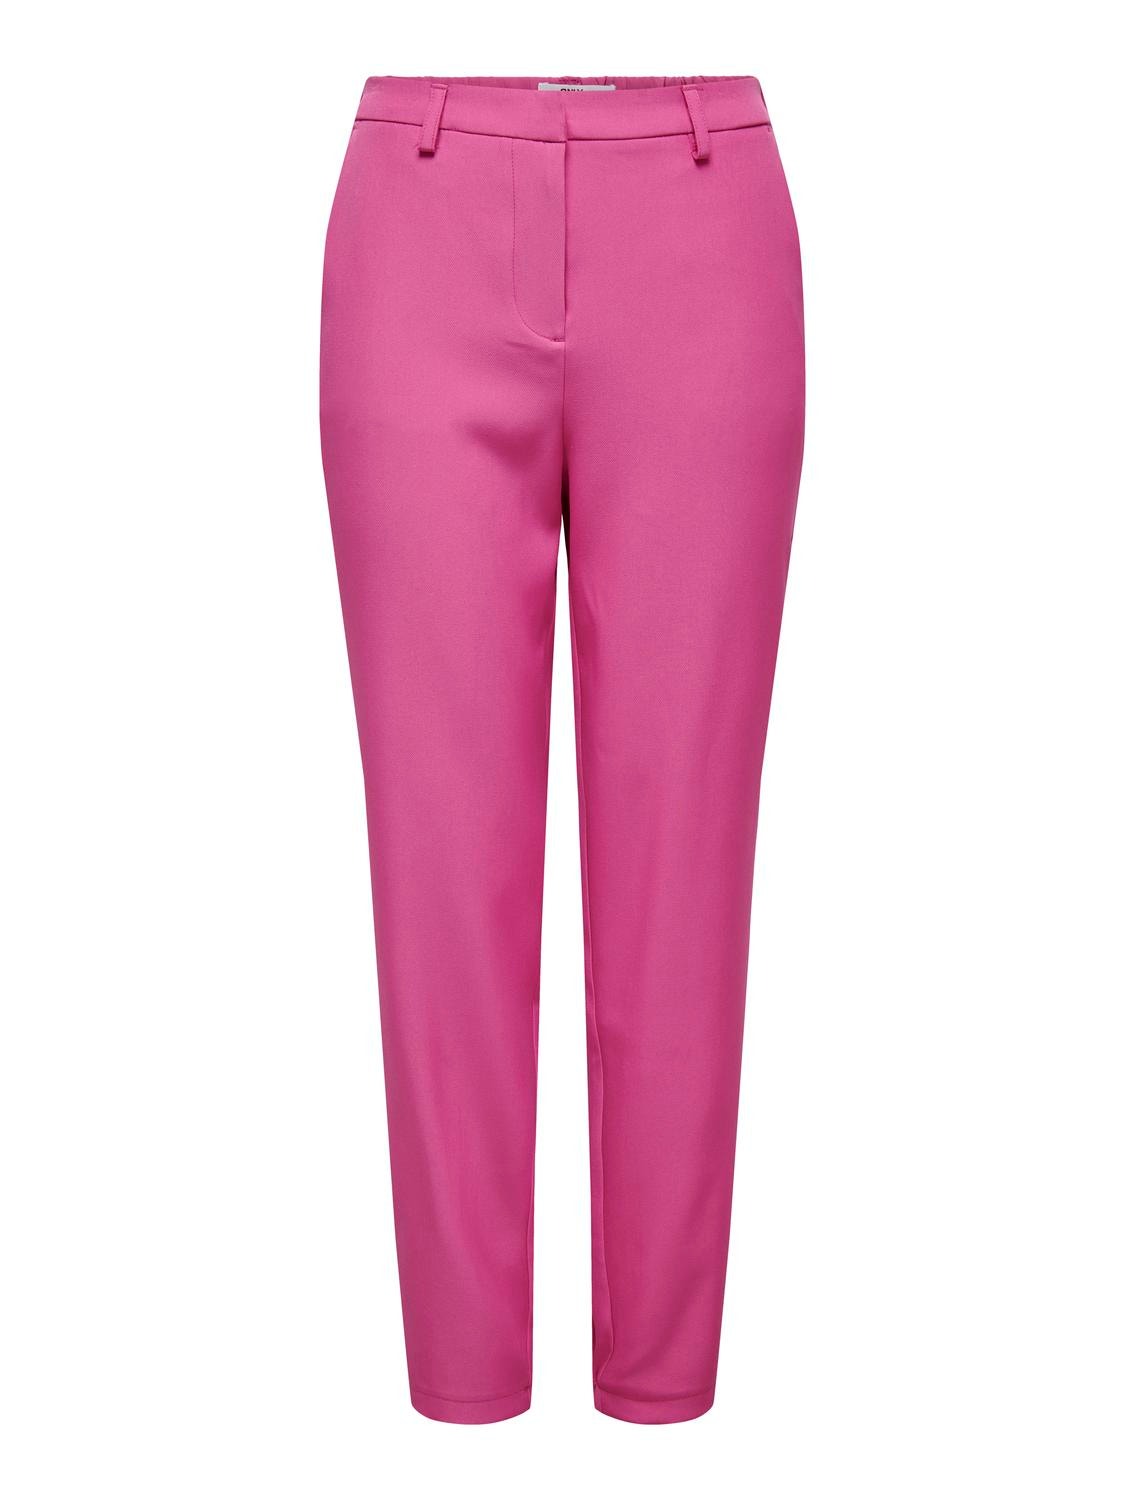 ONLY Trousers with mid waist -Raspberry Rose - 15311117